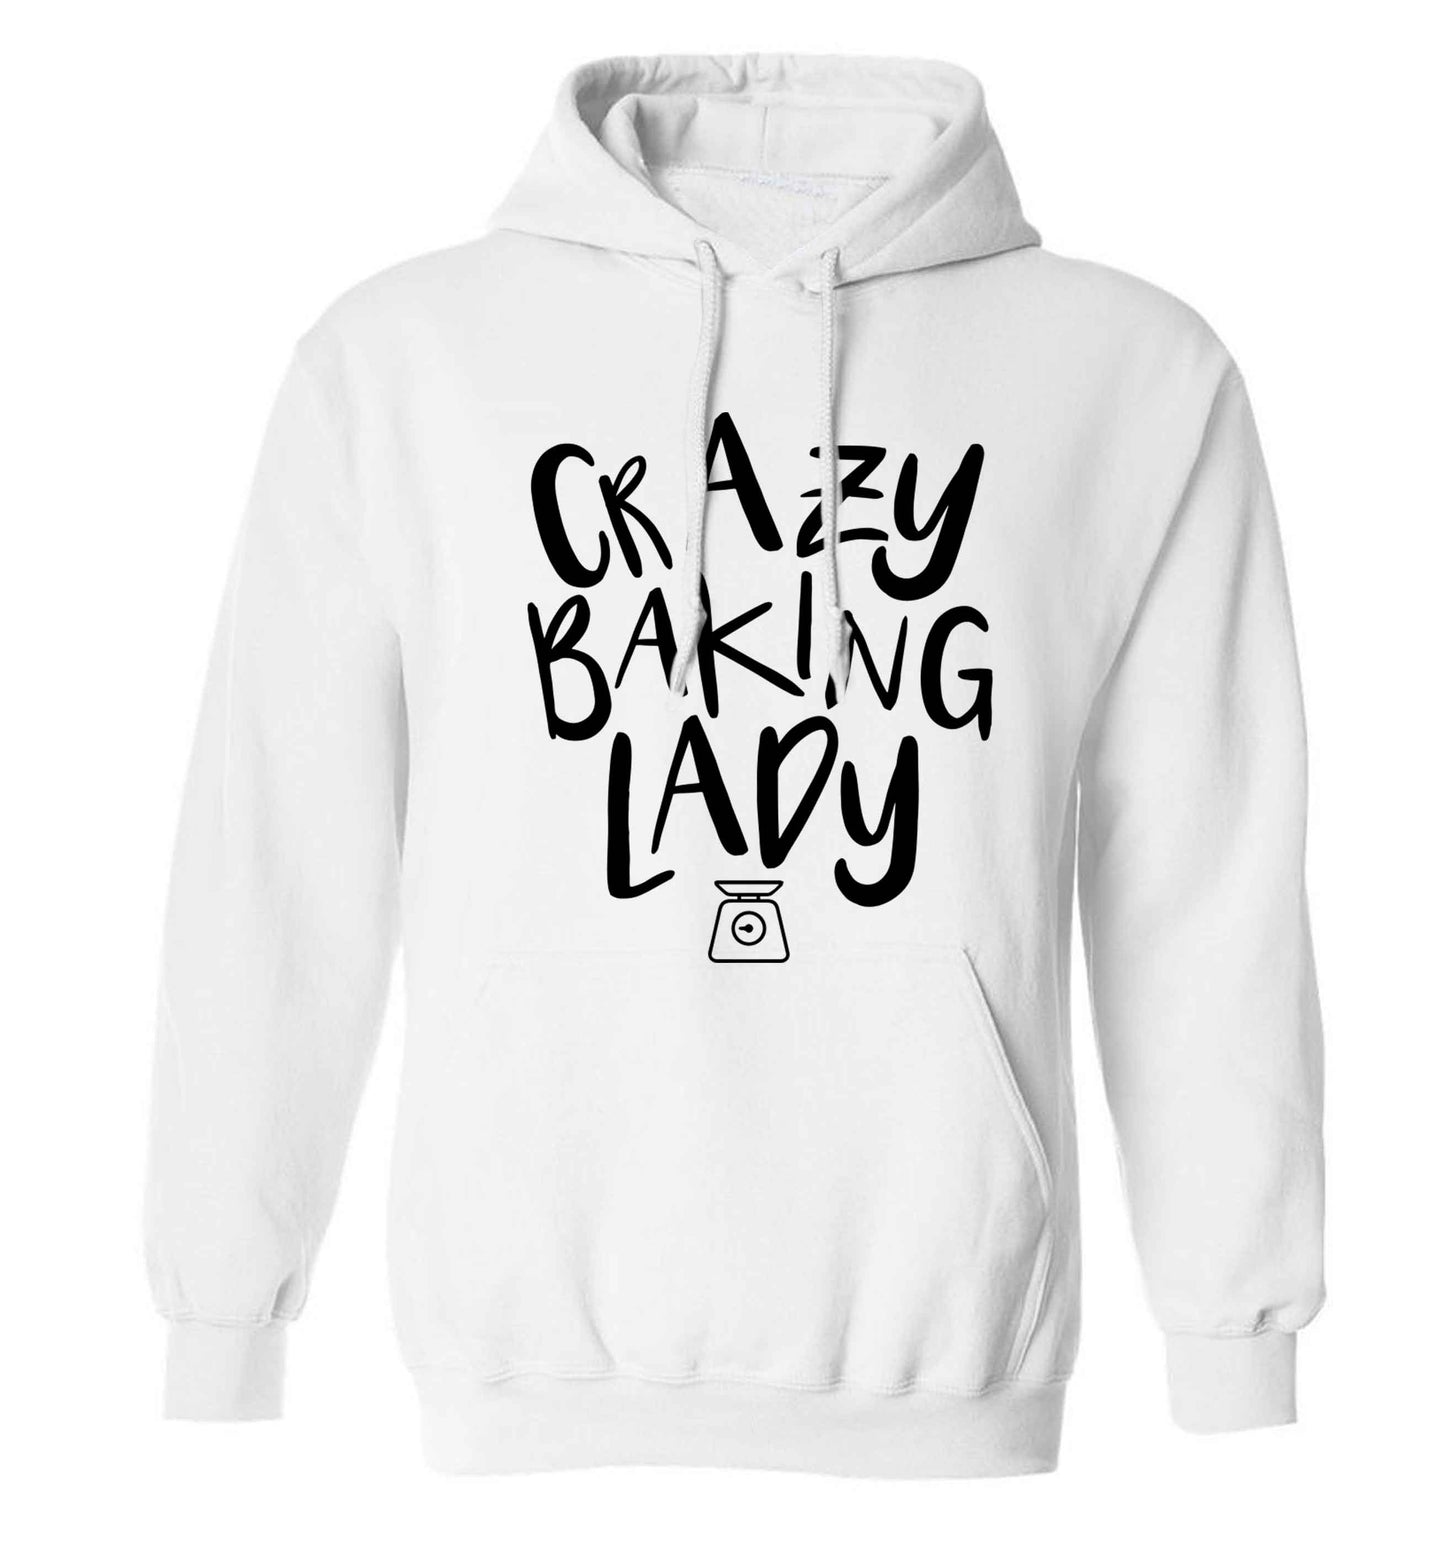 Crazy baking lady adults unisex white hoodie 2XL